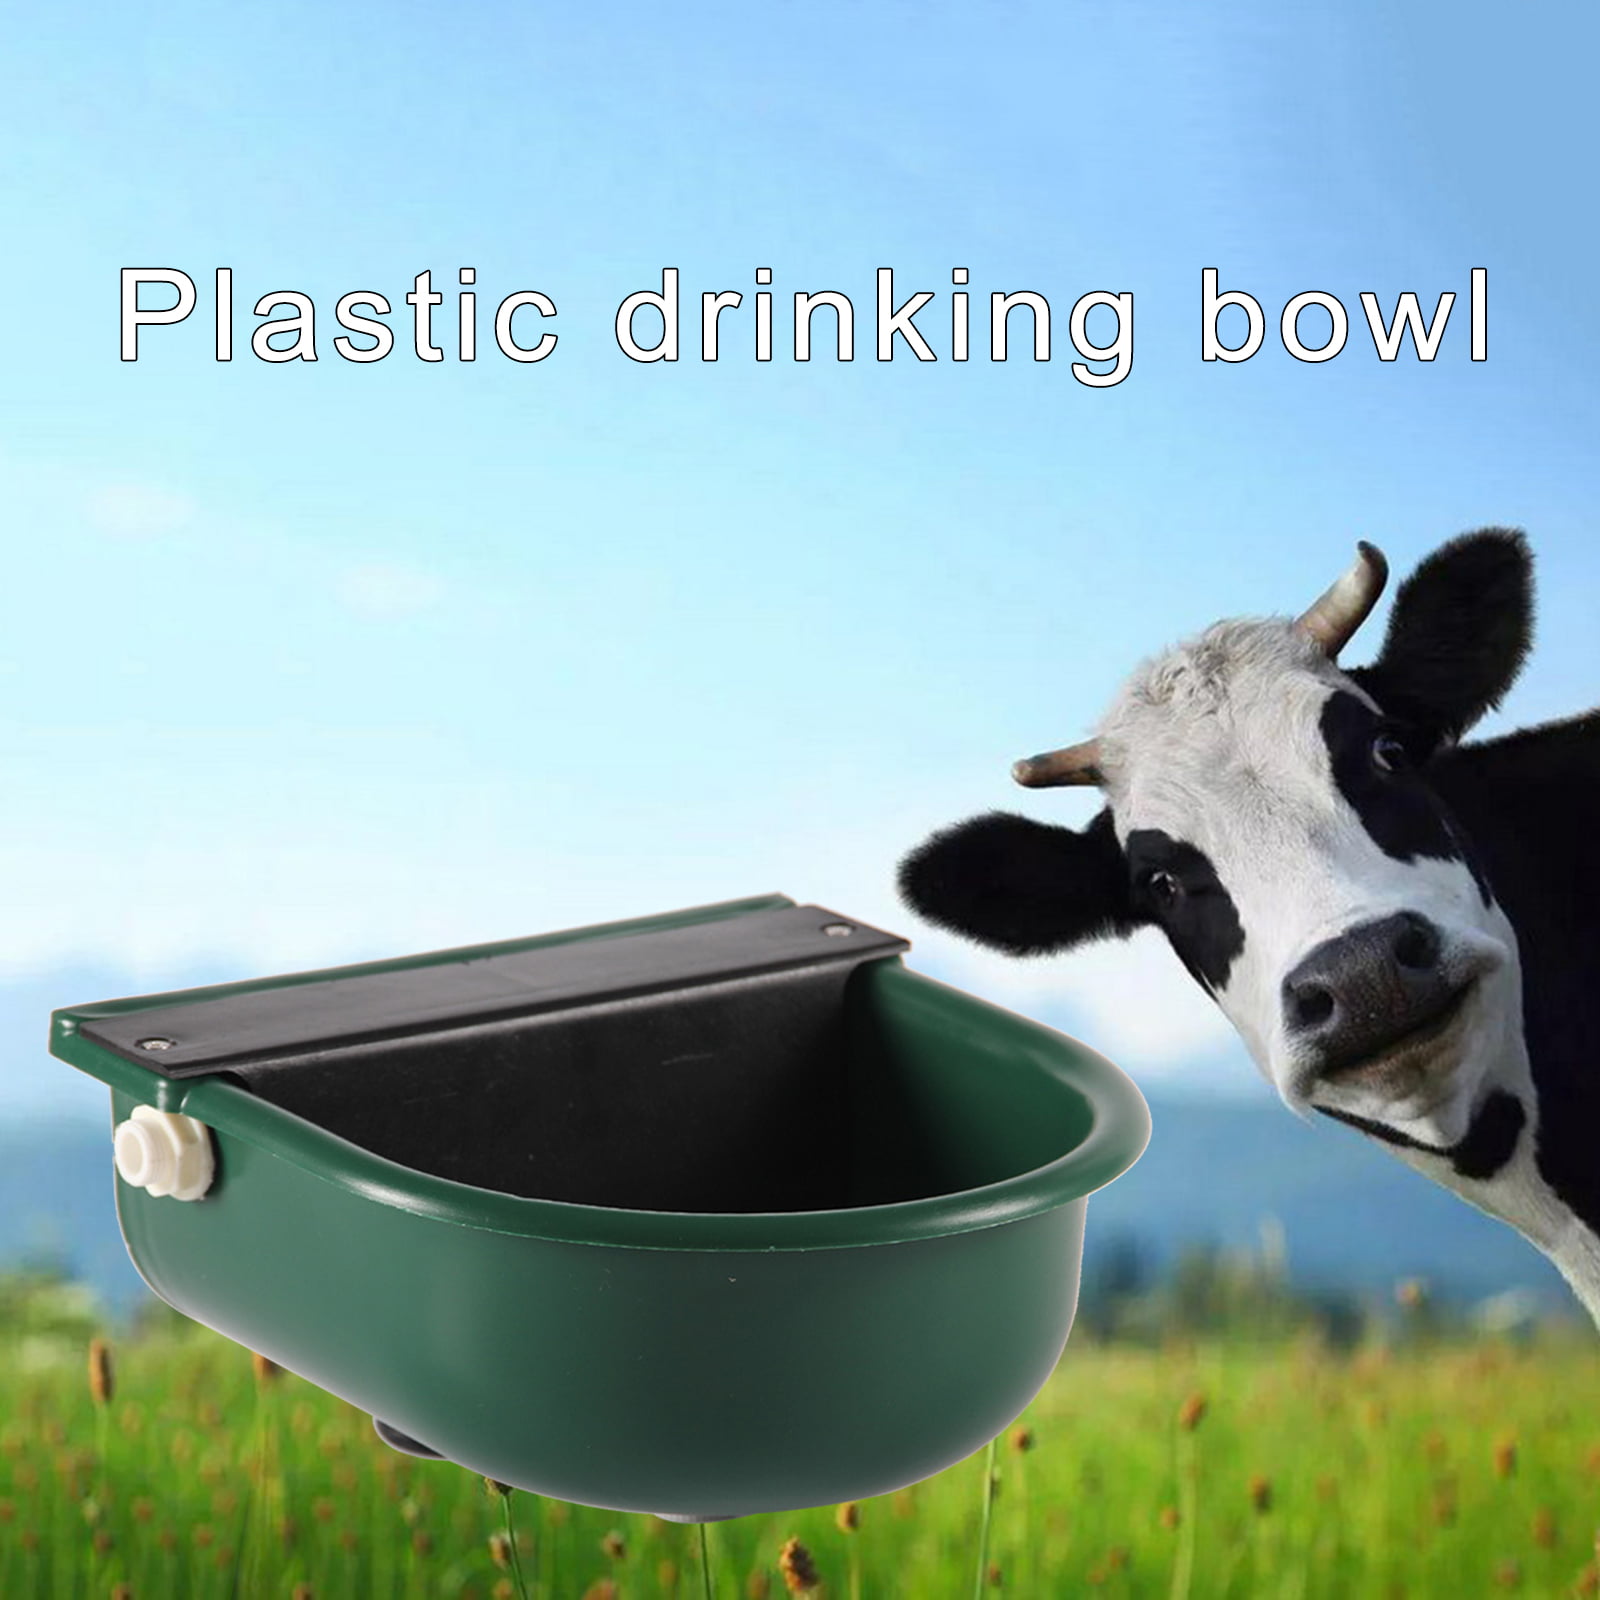 Automatic Float Livestock Waterer Cattle Horse Pony Drinking Bowl for Pet Livestock Dog Etc,Gray Durable Healthy PP Material Cattle Drinking Bowl Convenient Large 4L Float Valve Water Trough 